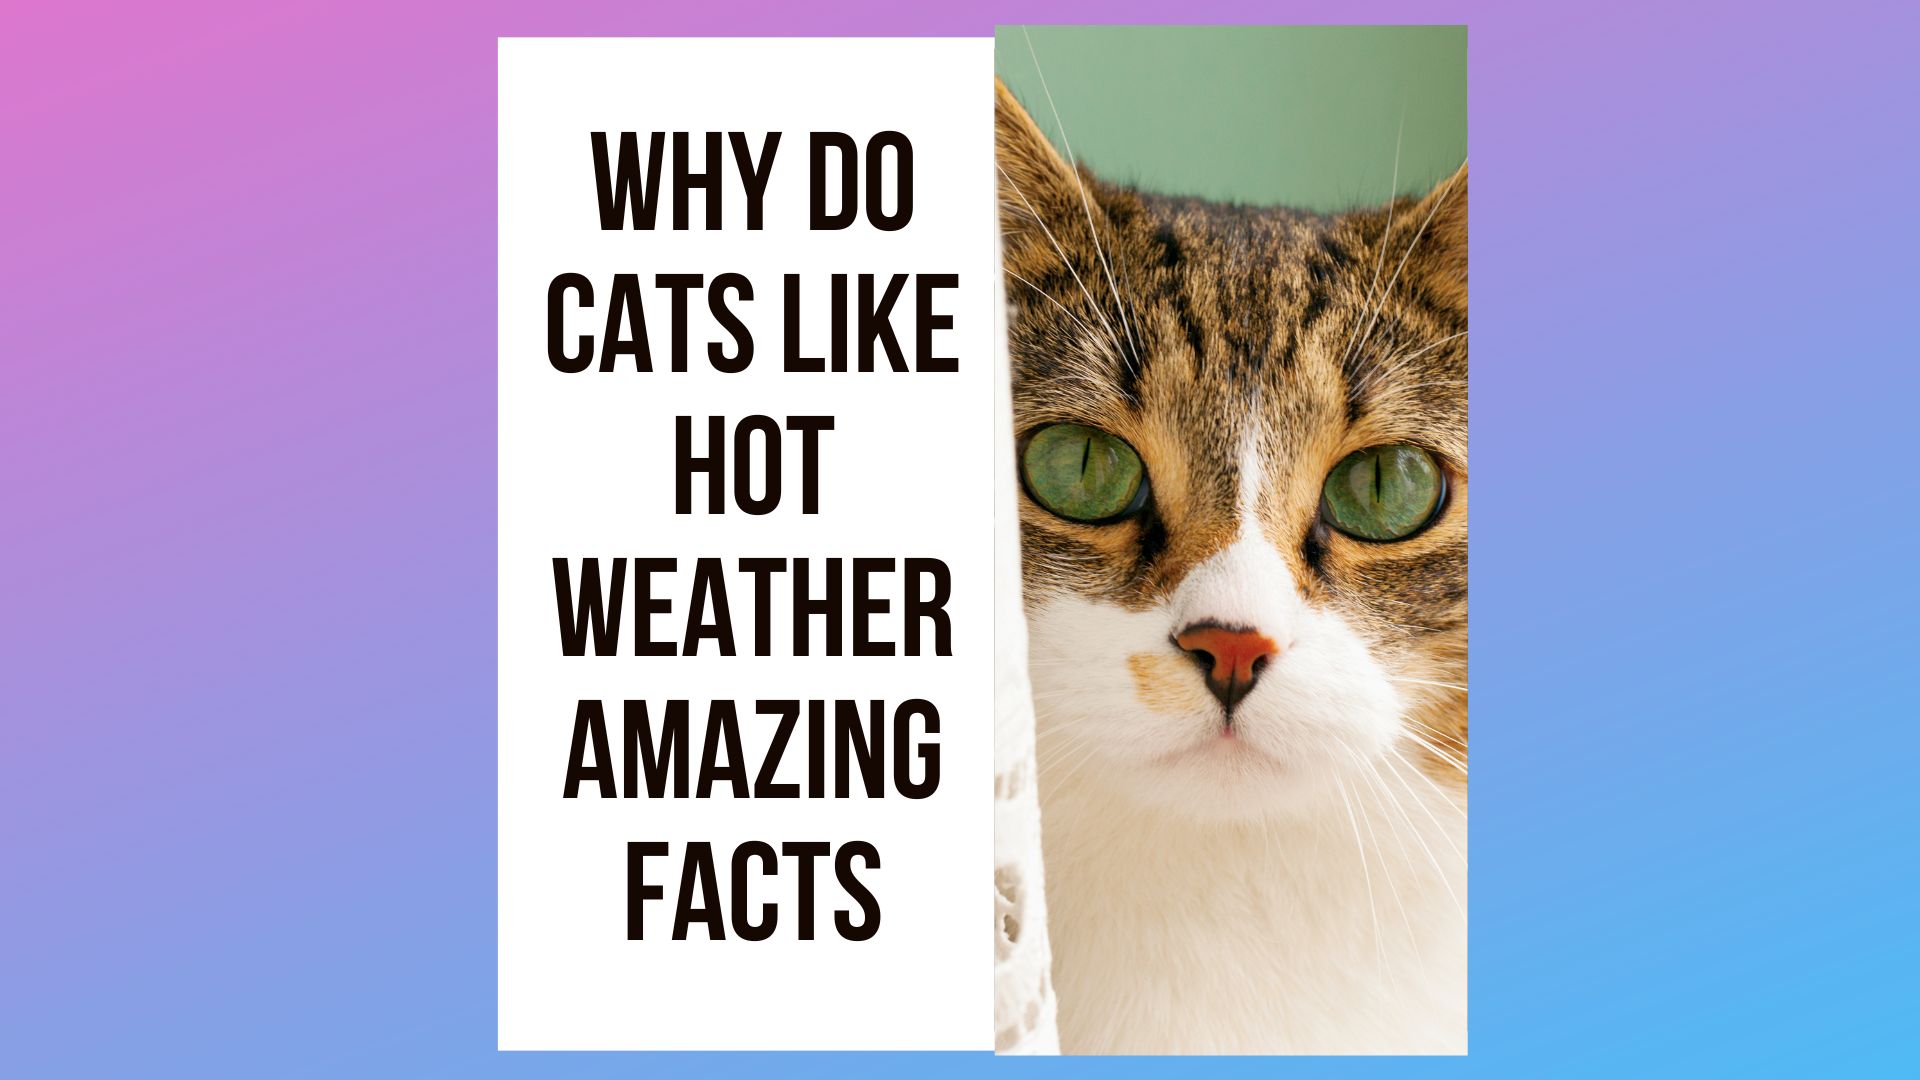 Why Do Cats Like Hot Weather: 5 Interesting Facts About Feline Heat Tolerance